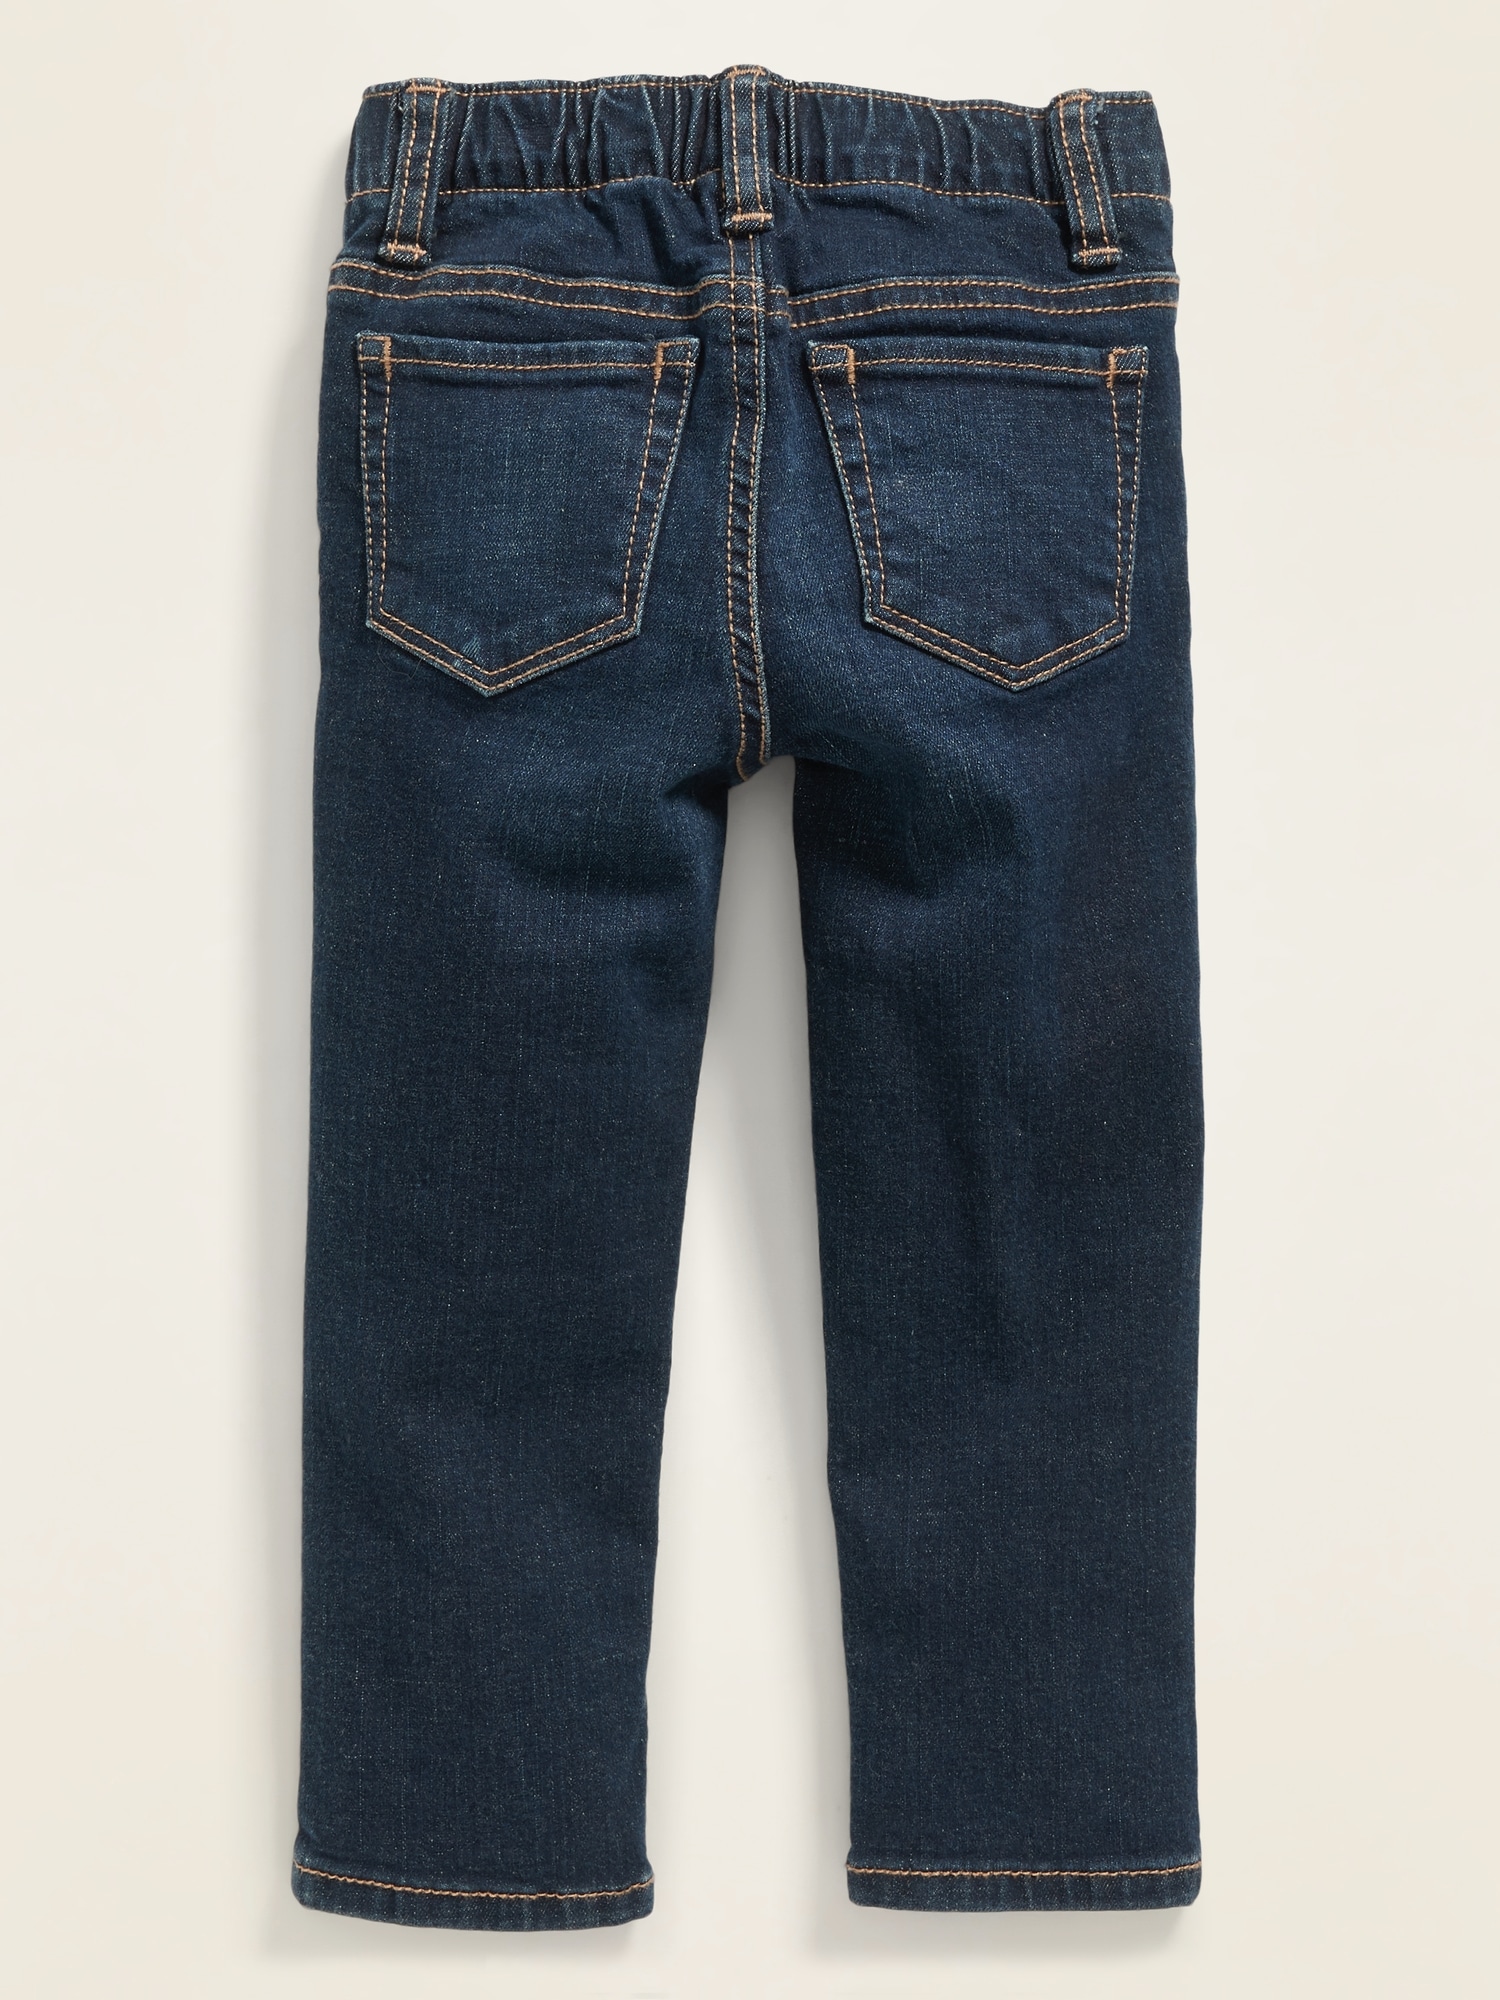 Old Navy Boys Jeans 18M-24M 